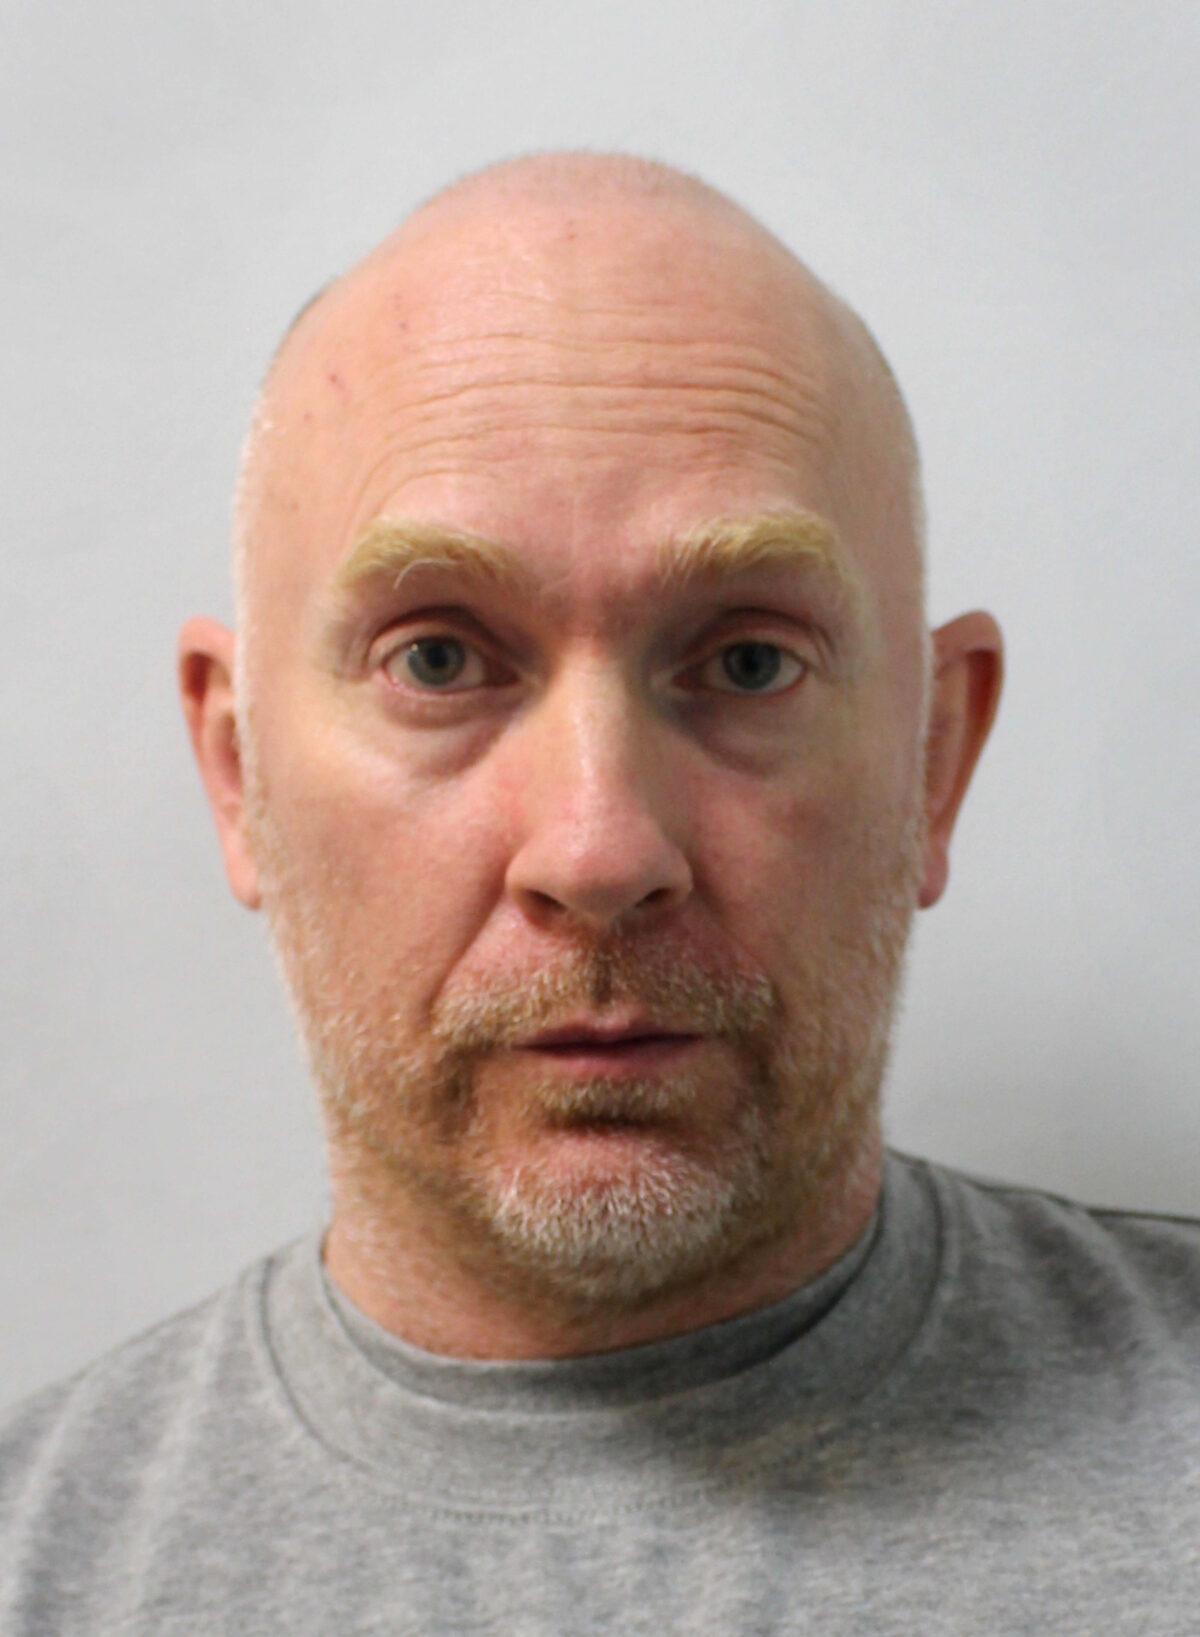 Wayne Couzens, who has pleaded guilty at the Old Bailey to the murder of Sarah Everard, in an undated handout photo. (Metropolitan Police/PA)